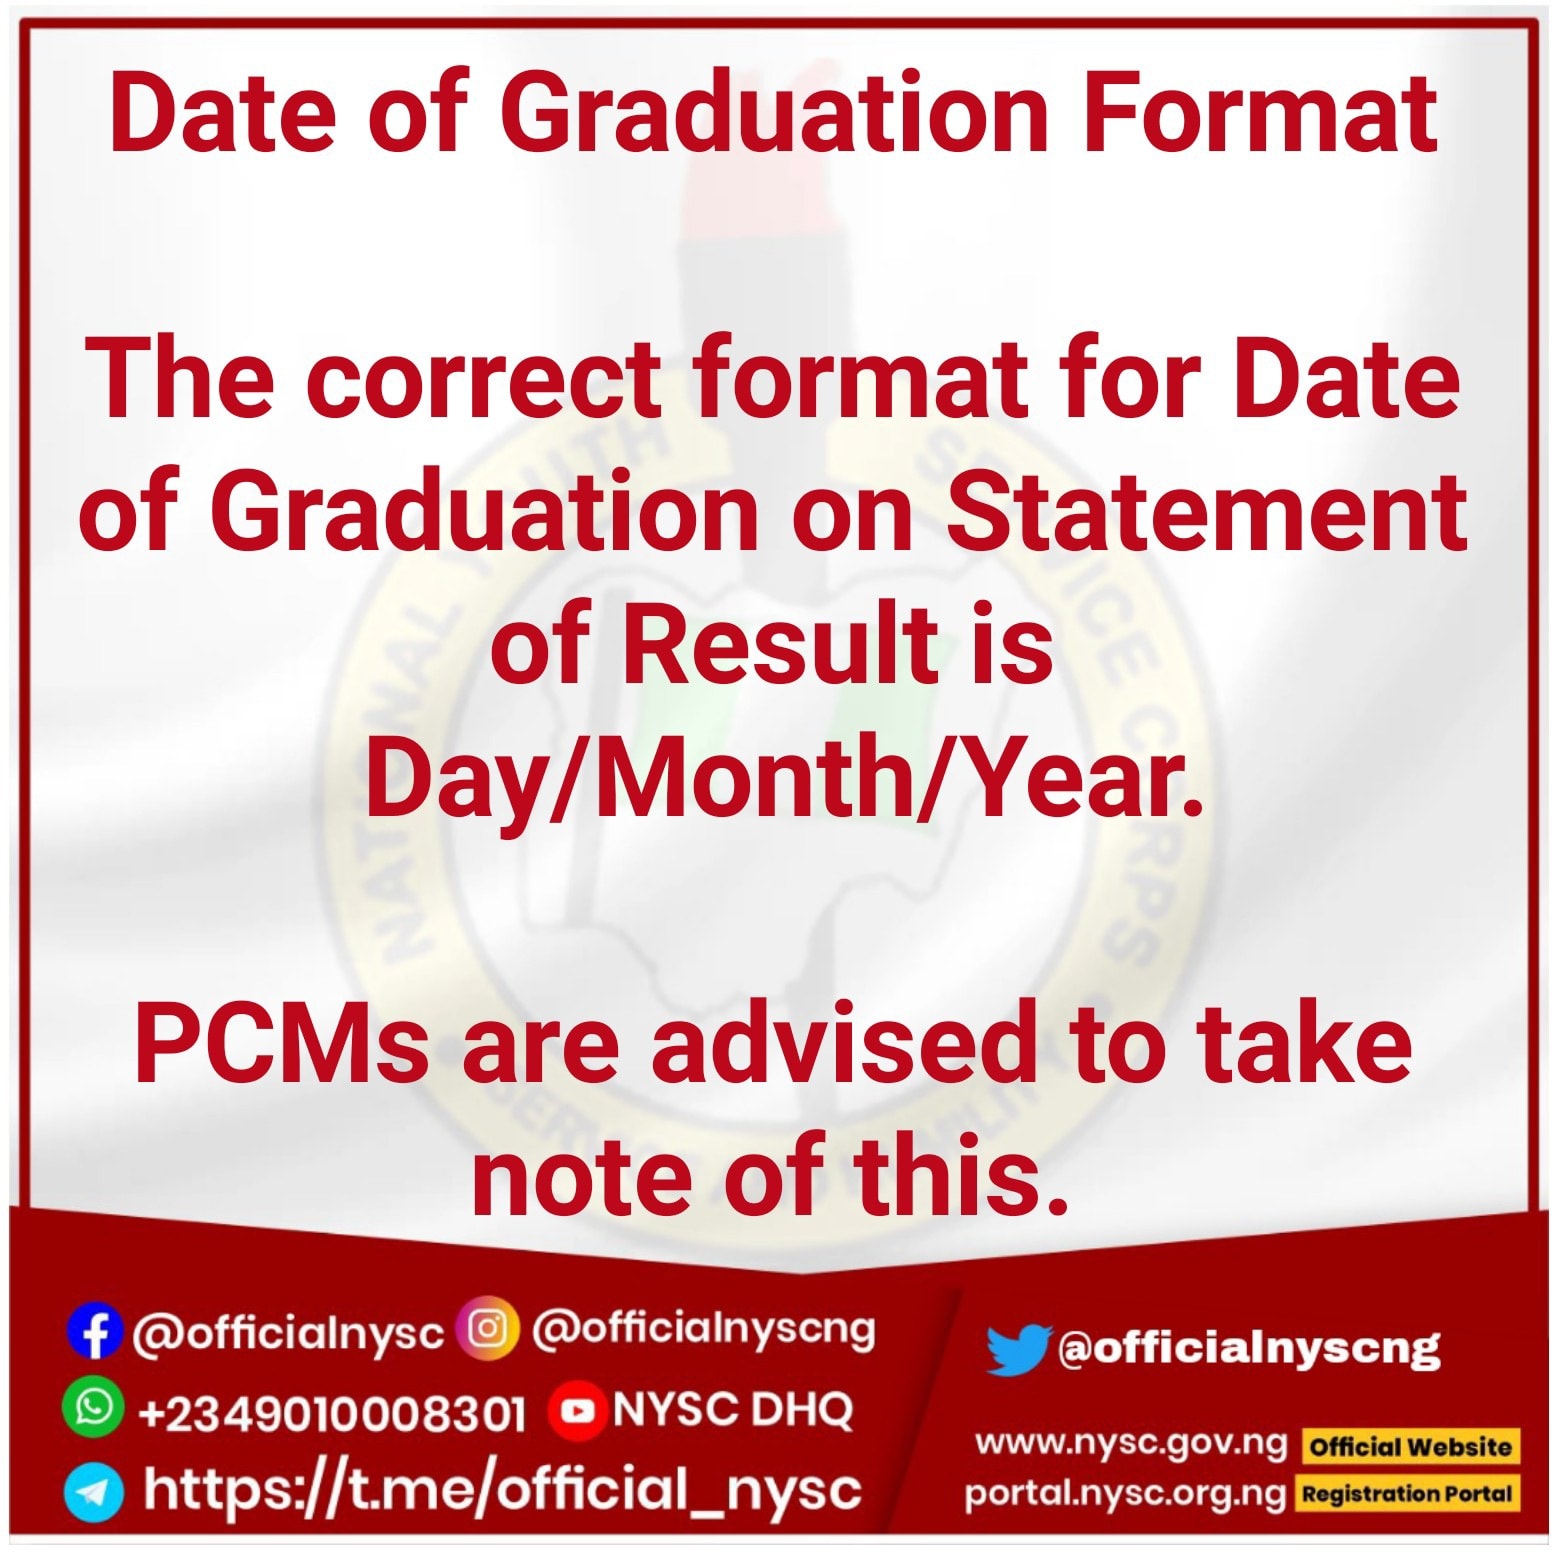 CORRECTION OF DATE OF GRADUATION